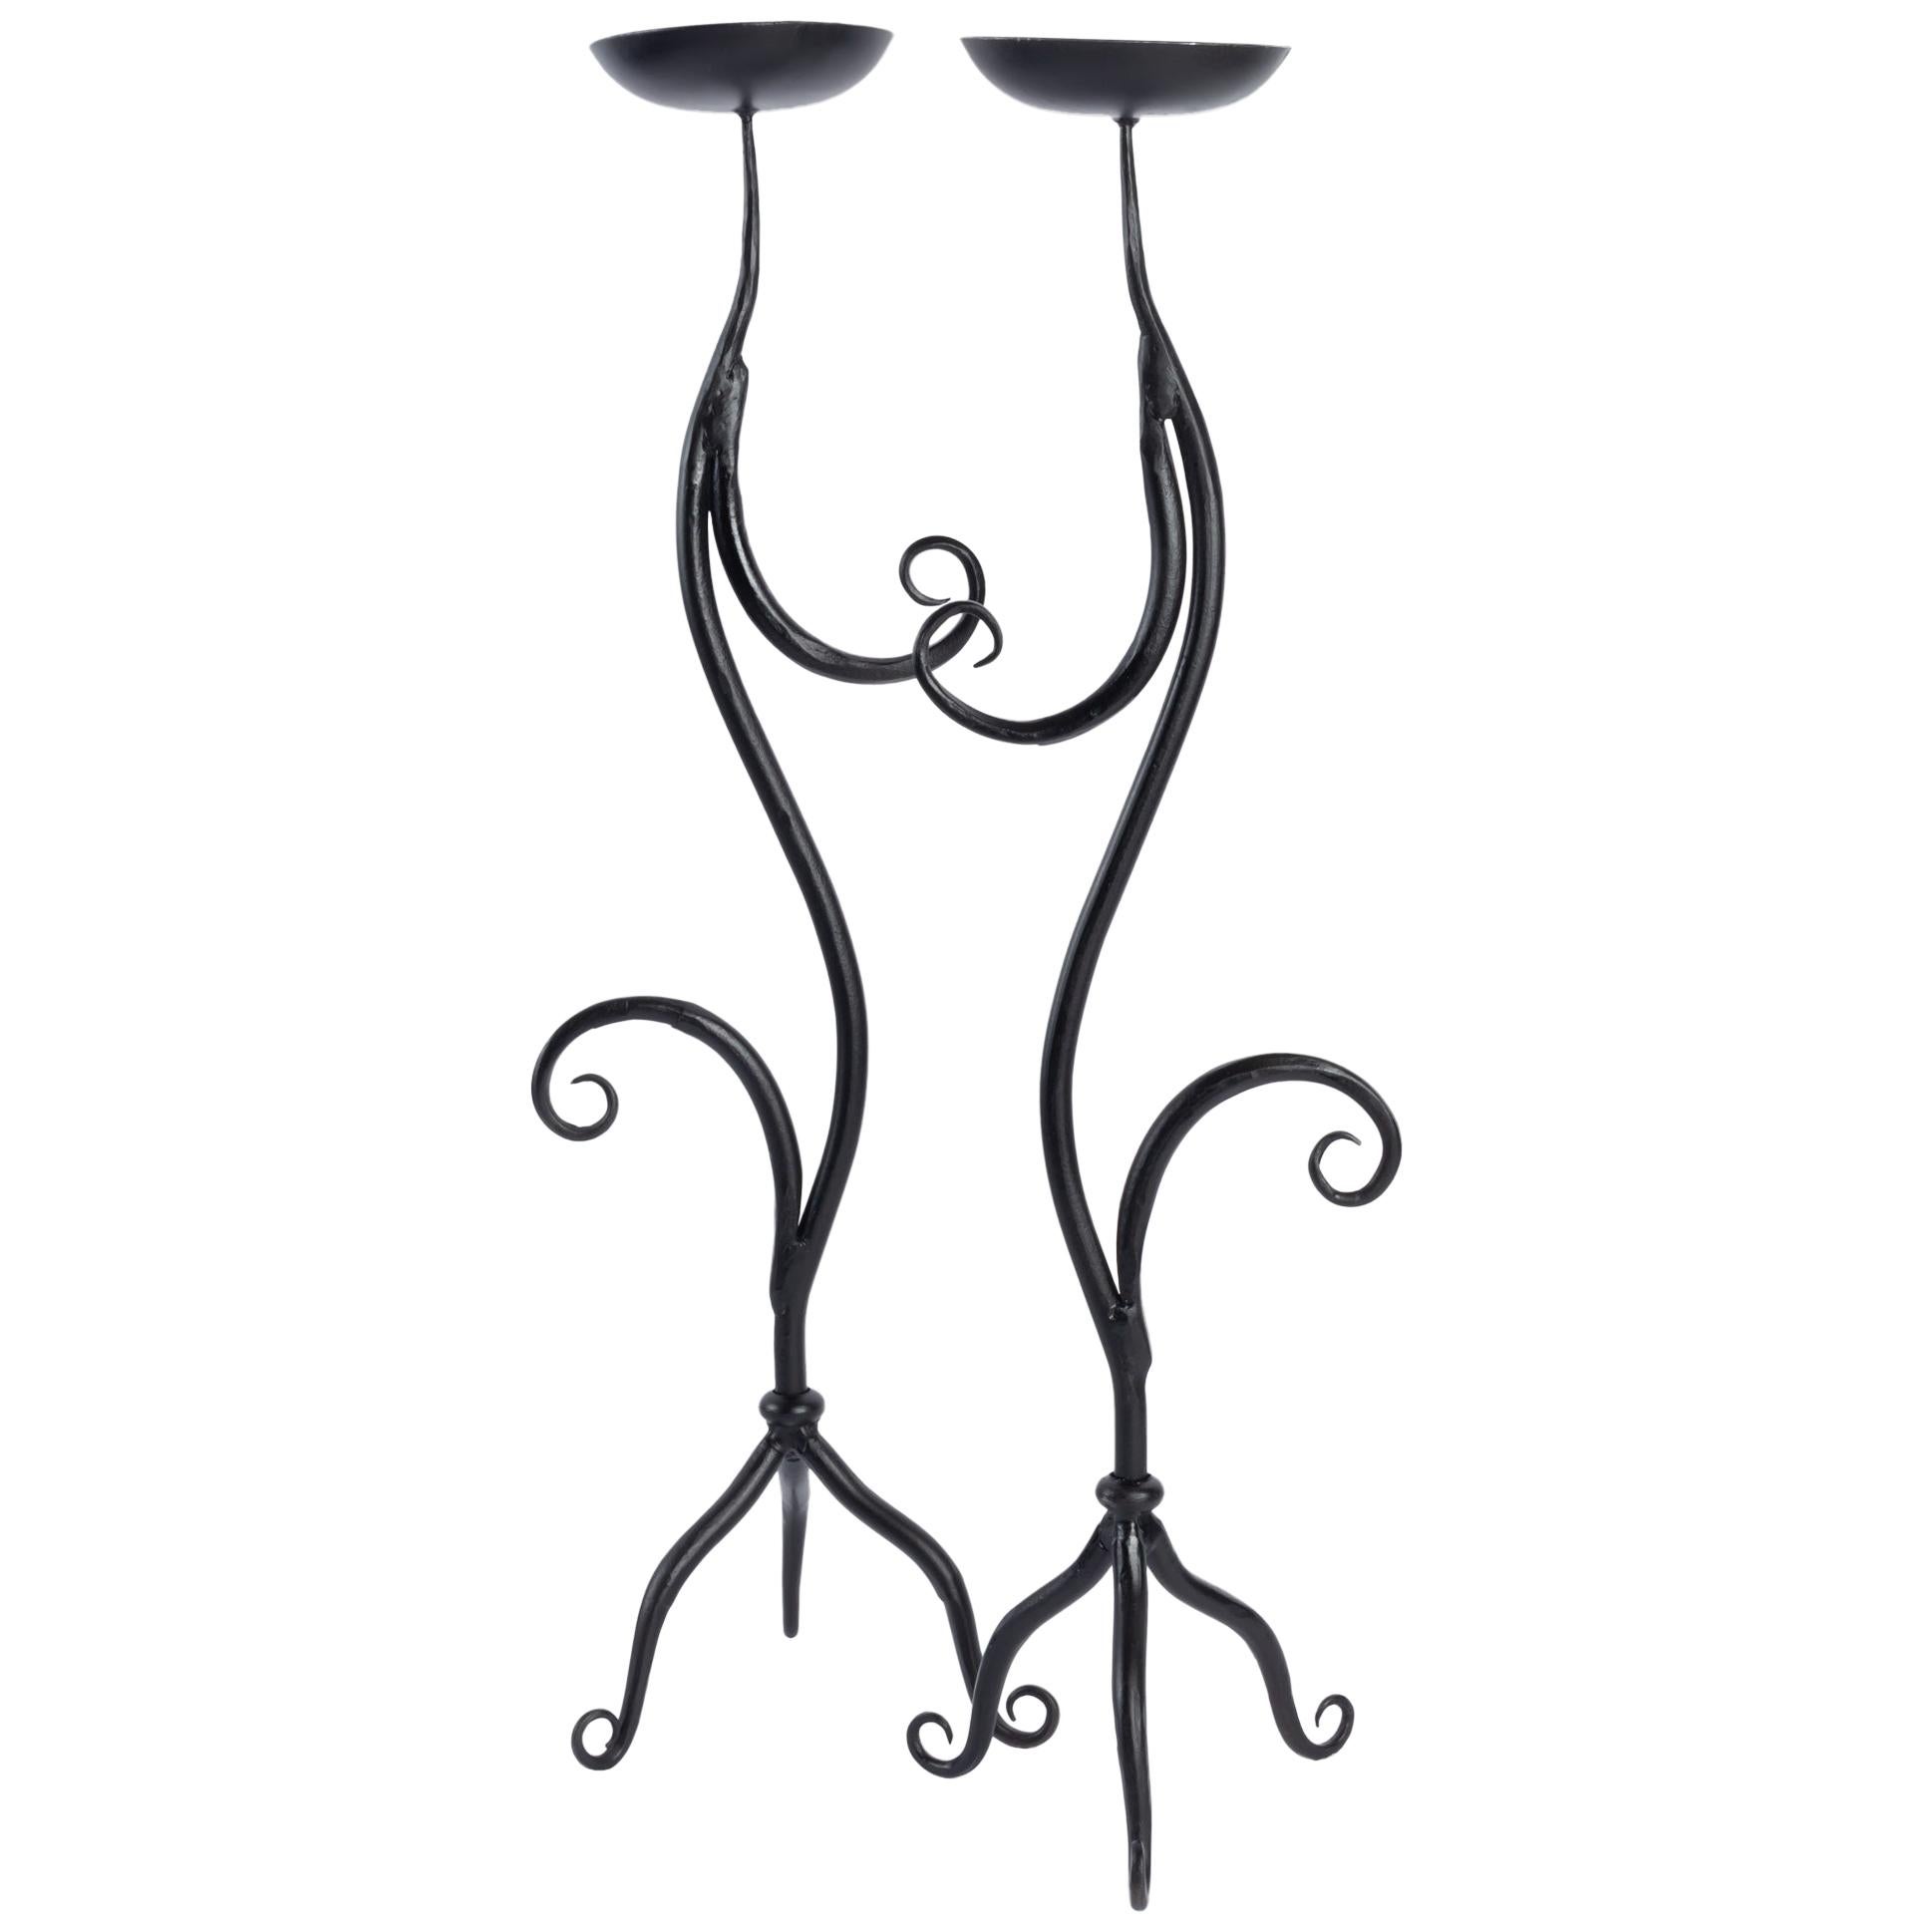 1960 Charming Pair of Wrought Iron Candlesticks, Ateliers Vallauris